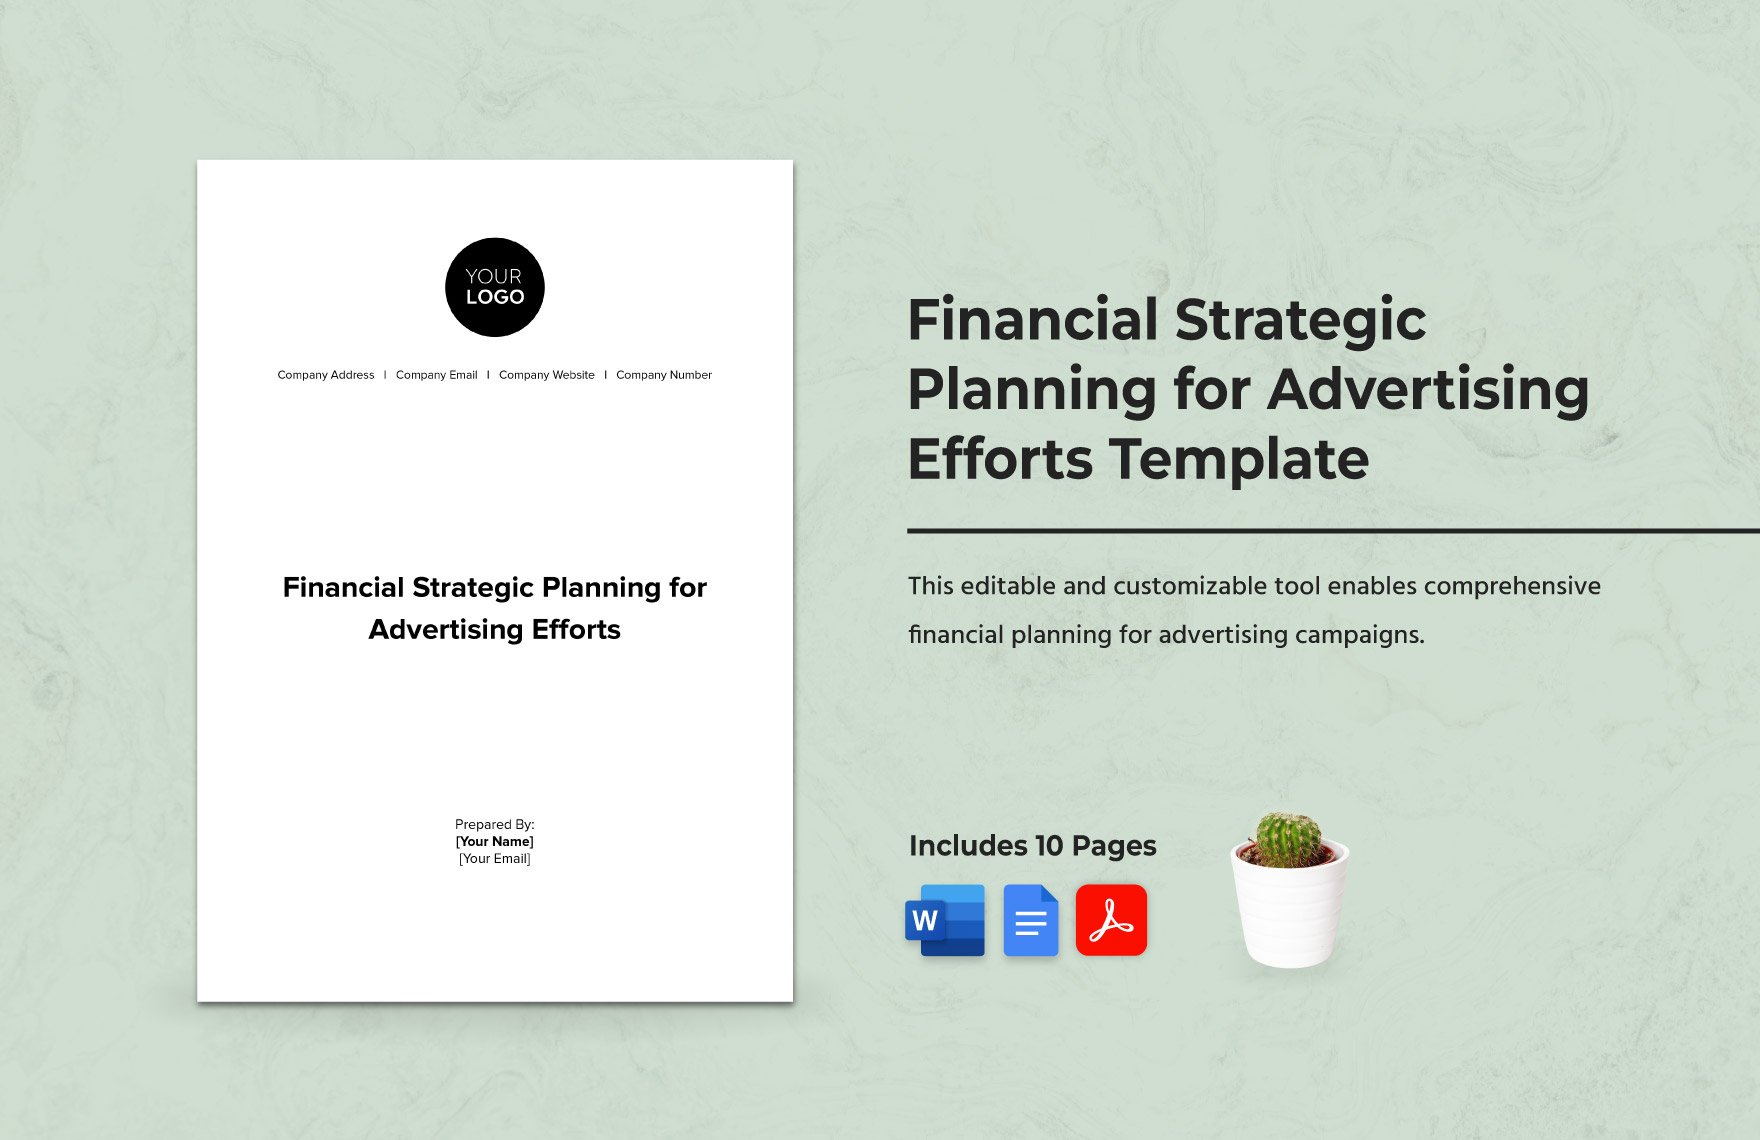 Financial Strategic Planning for Advertising Efforts Template in Word, Google Docs, PDF